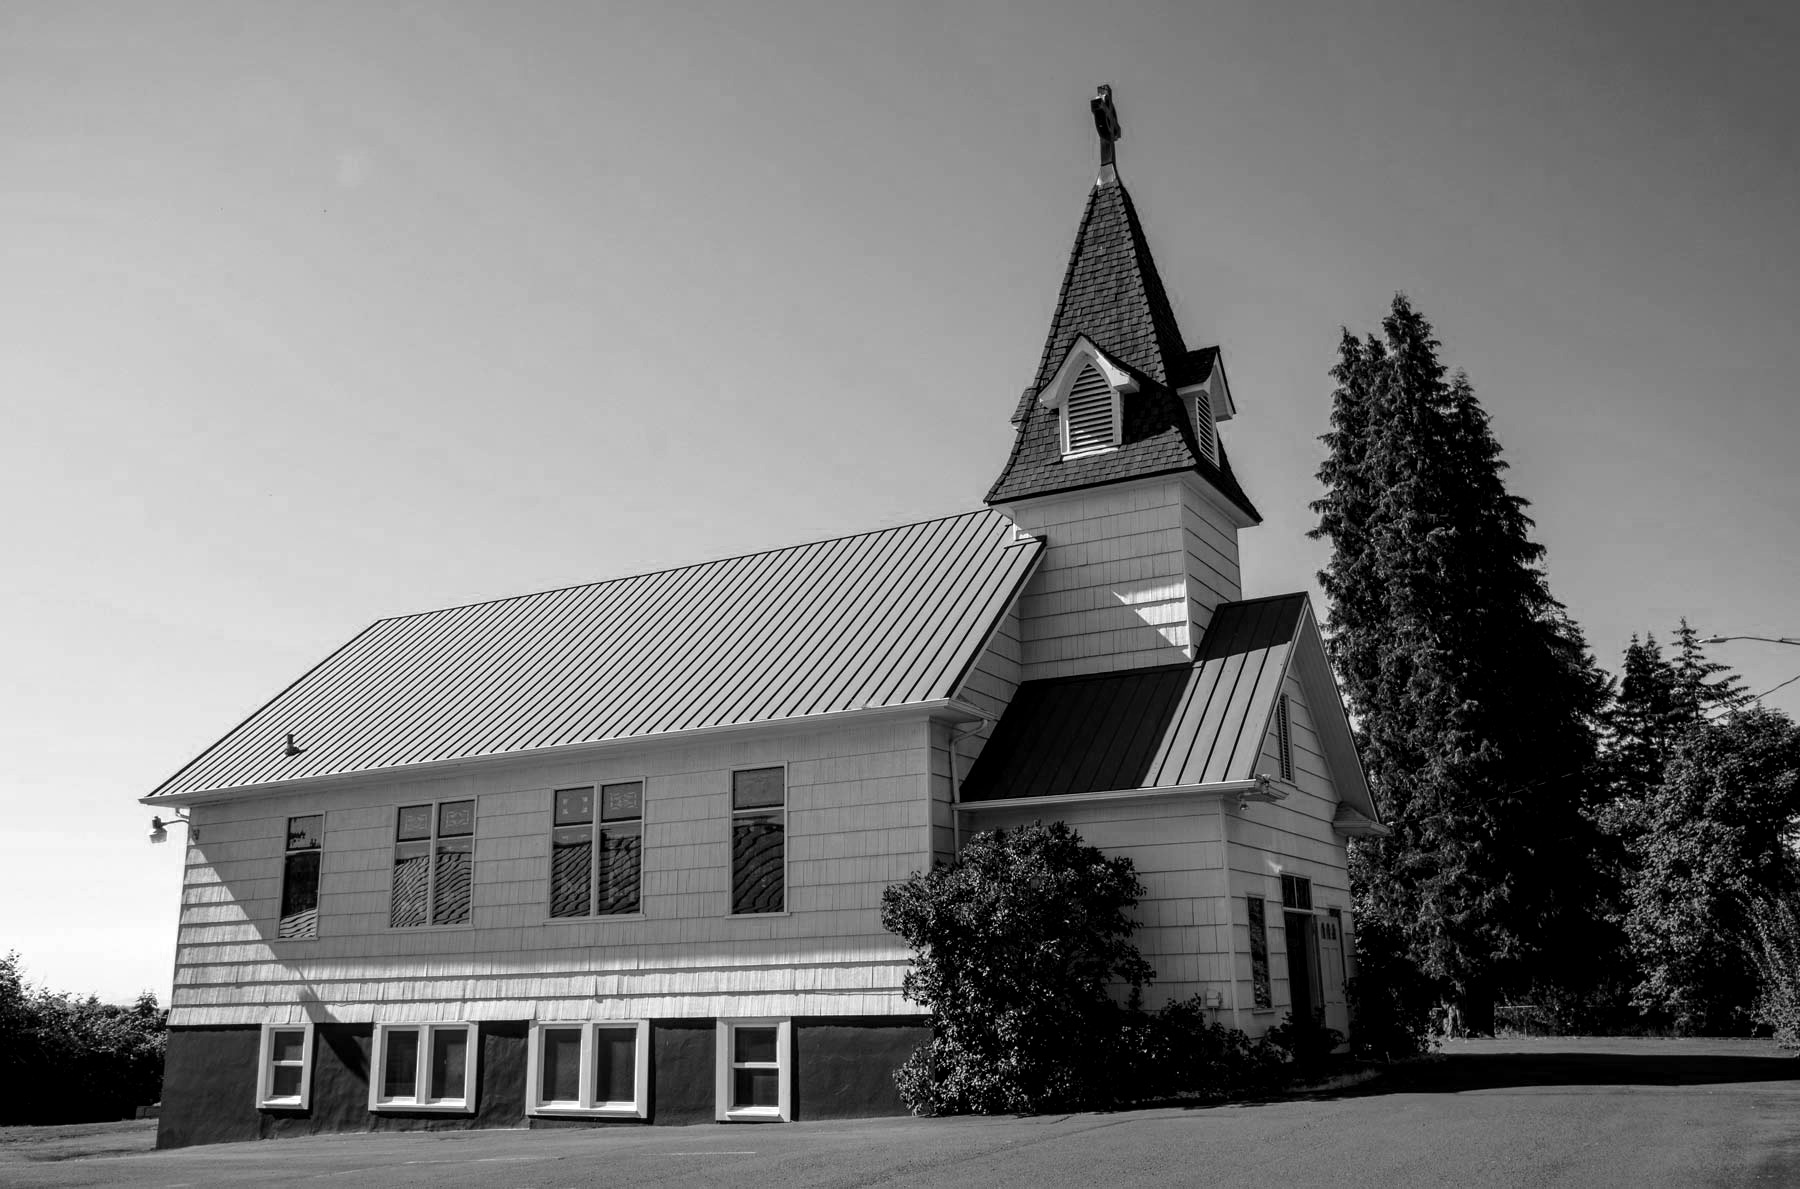 Beavercreek United Church of Christ in black and white on a sunny day, the church has stain glass windows and a tall steeple toward the front of the church